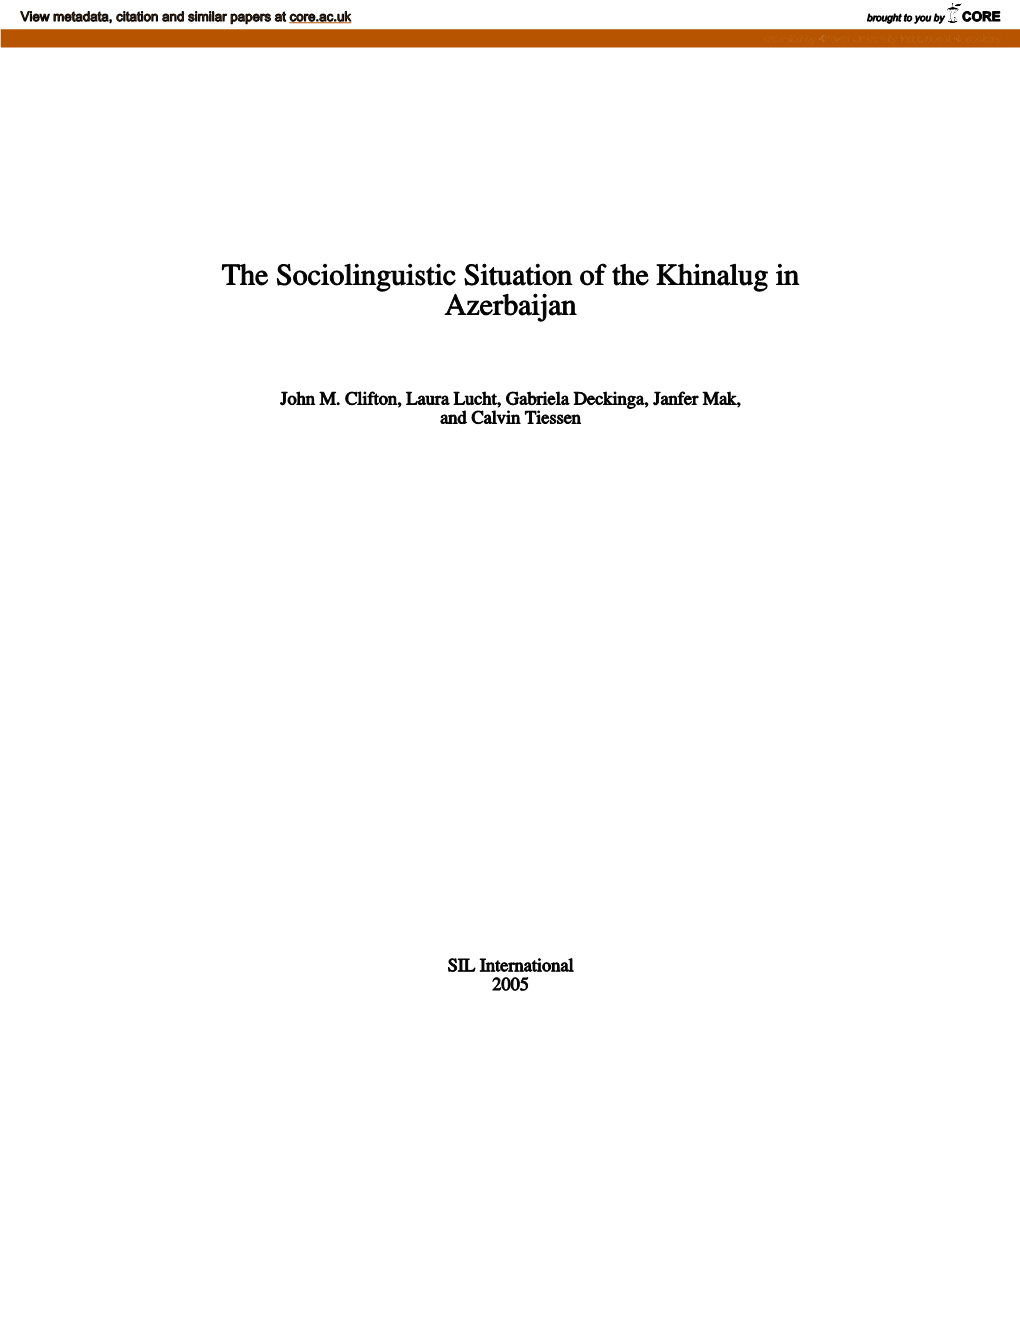 The Sociolinguistic Situation of the Khinalug in Azerbaijan